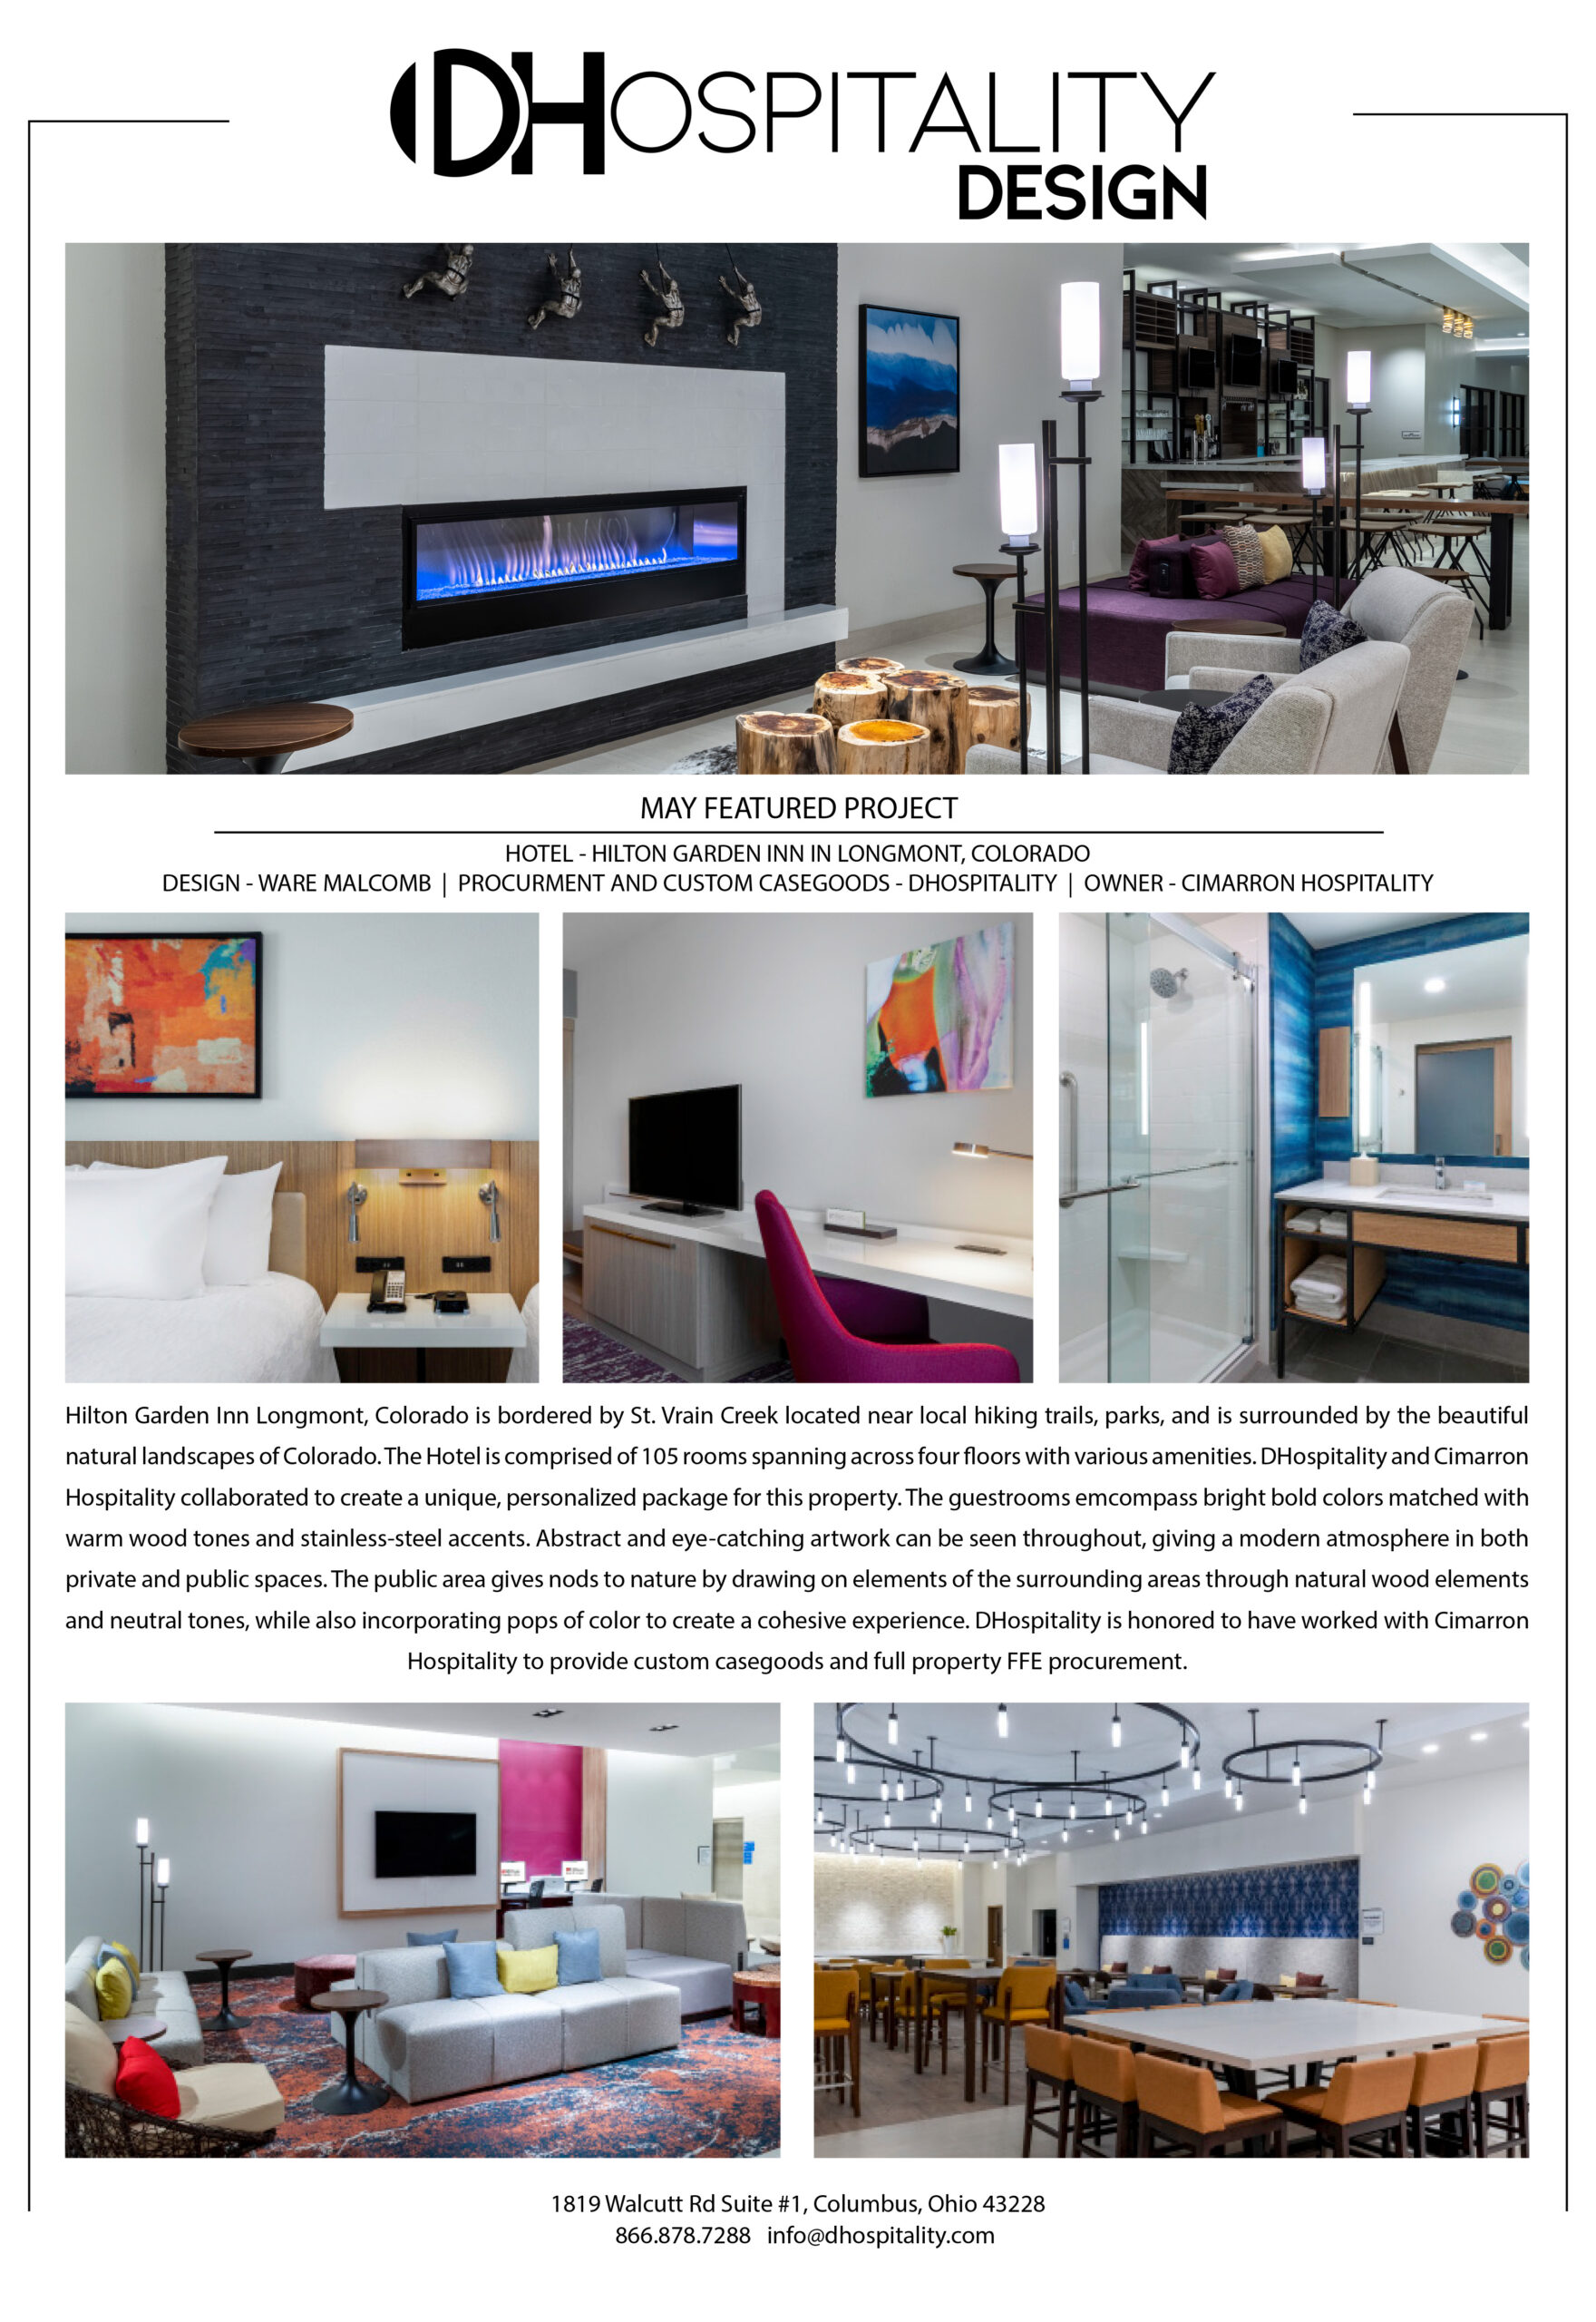 May’s Featured Project – Hilton Garden Inn, Longmont, CO